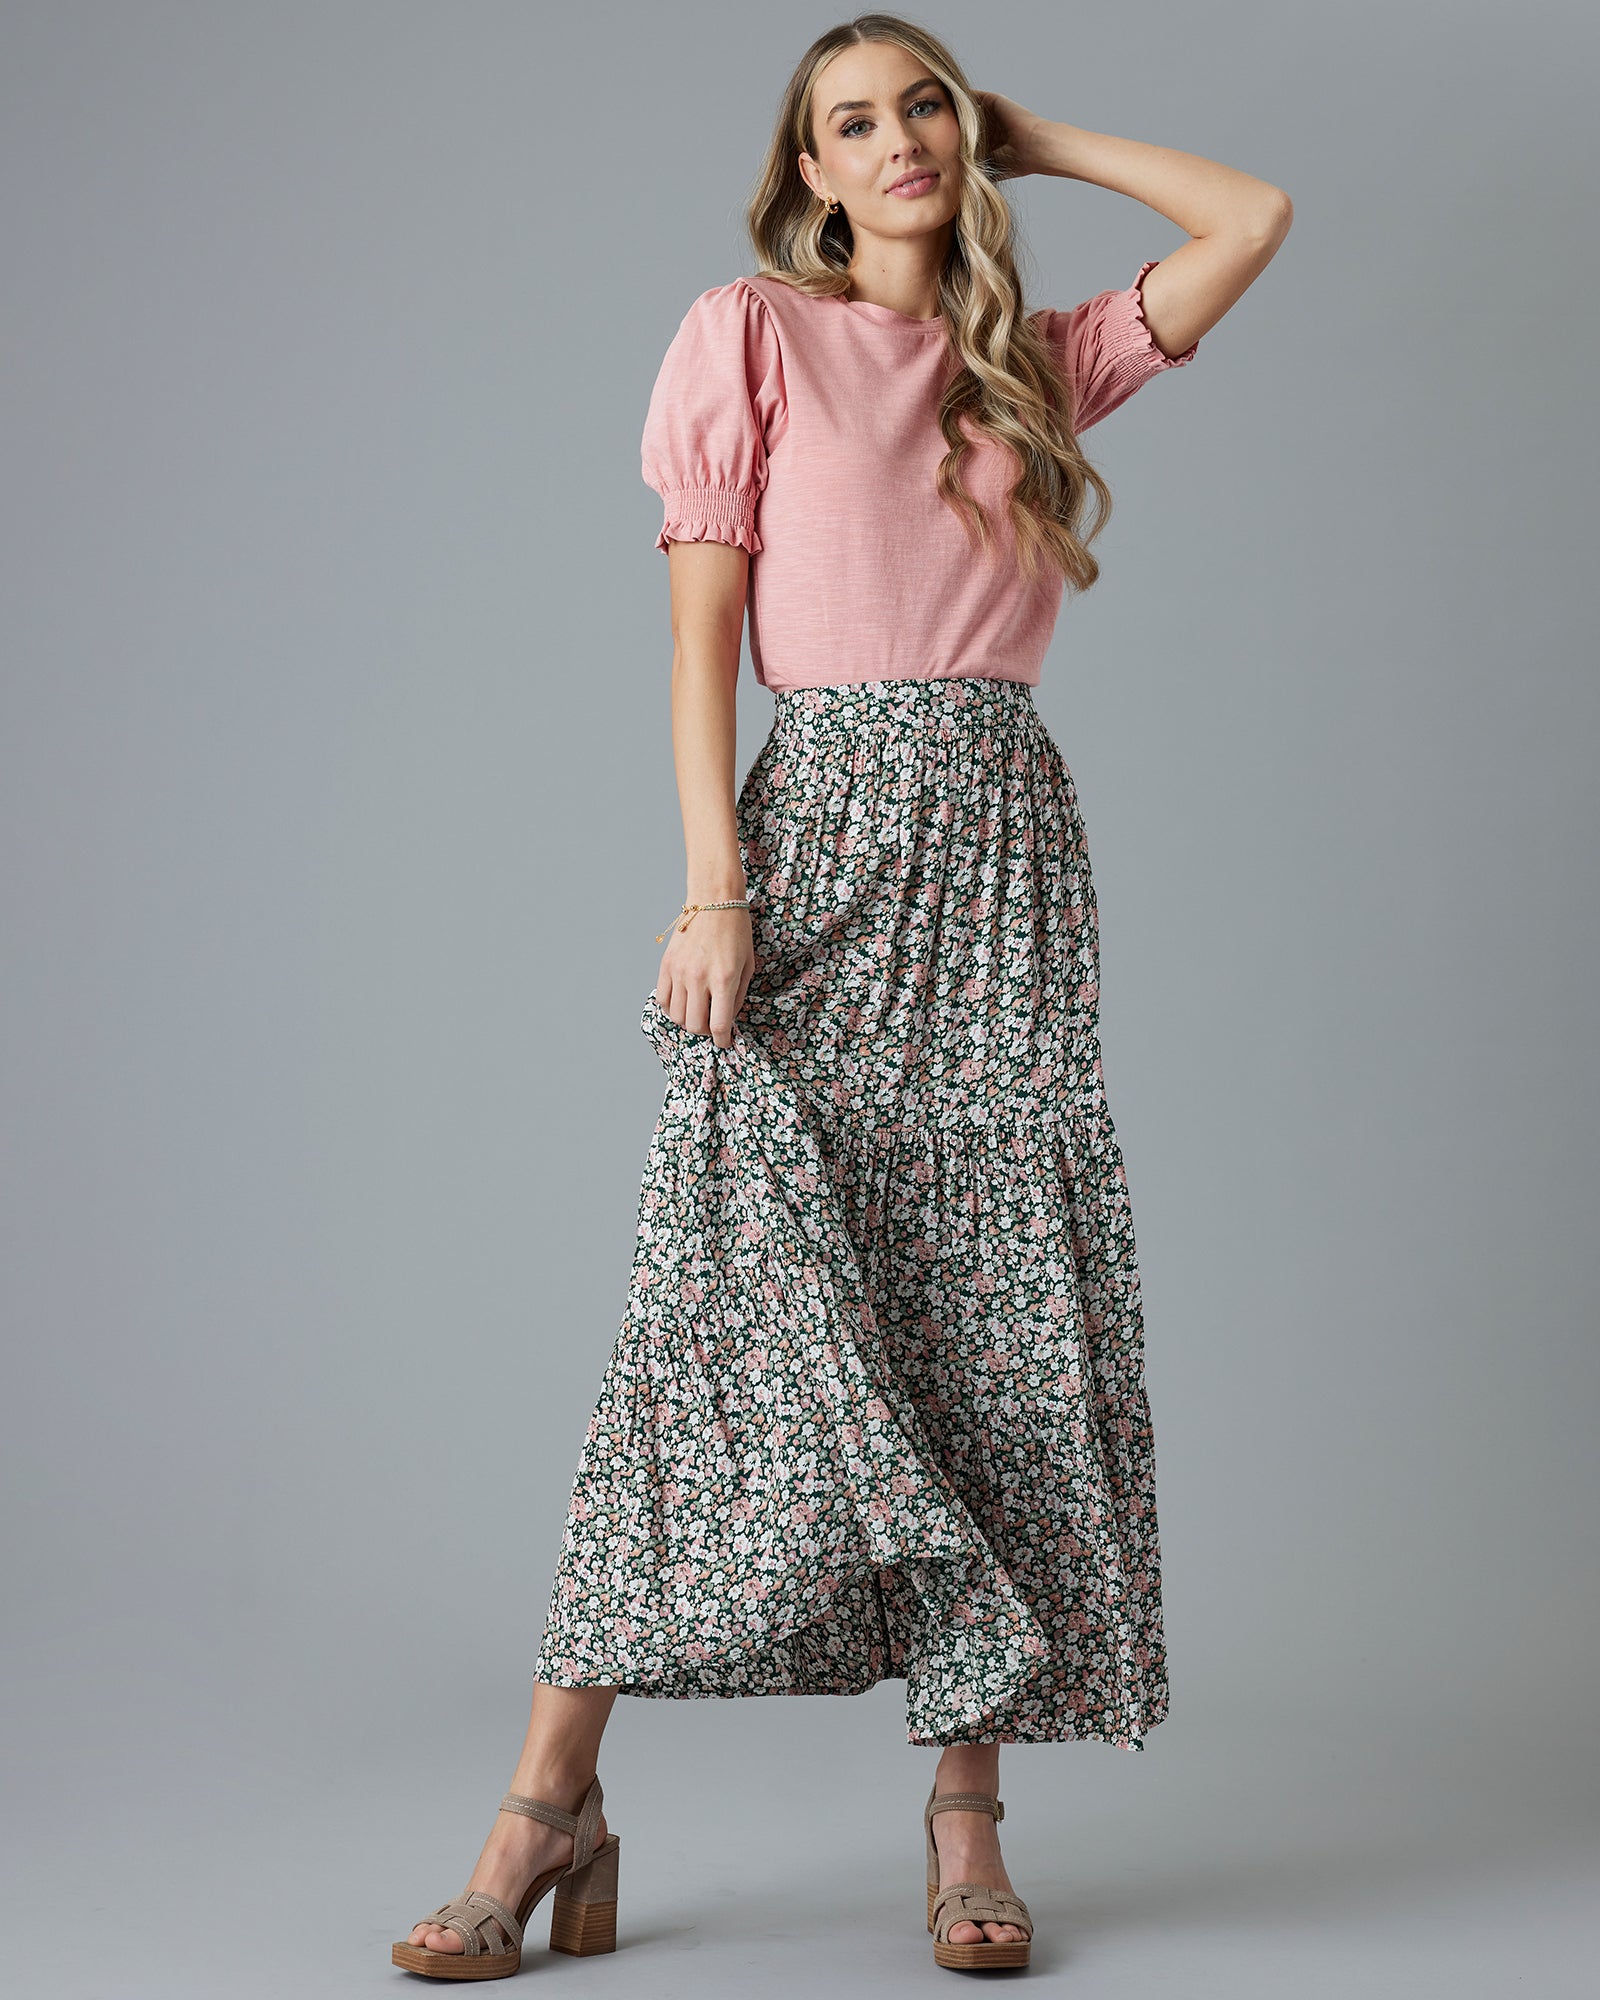 Woman in a floral, maxi-length skirt